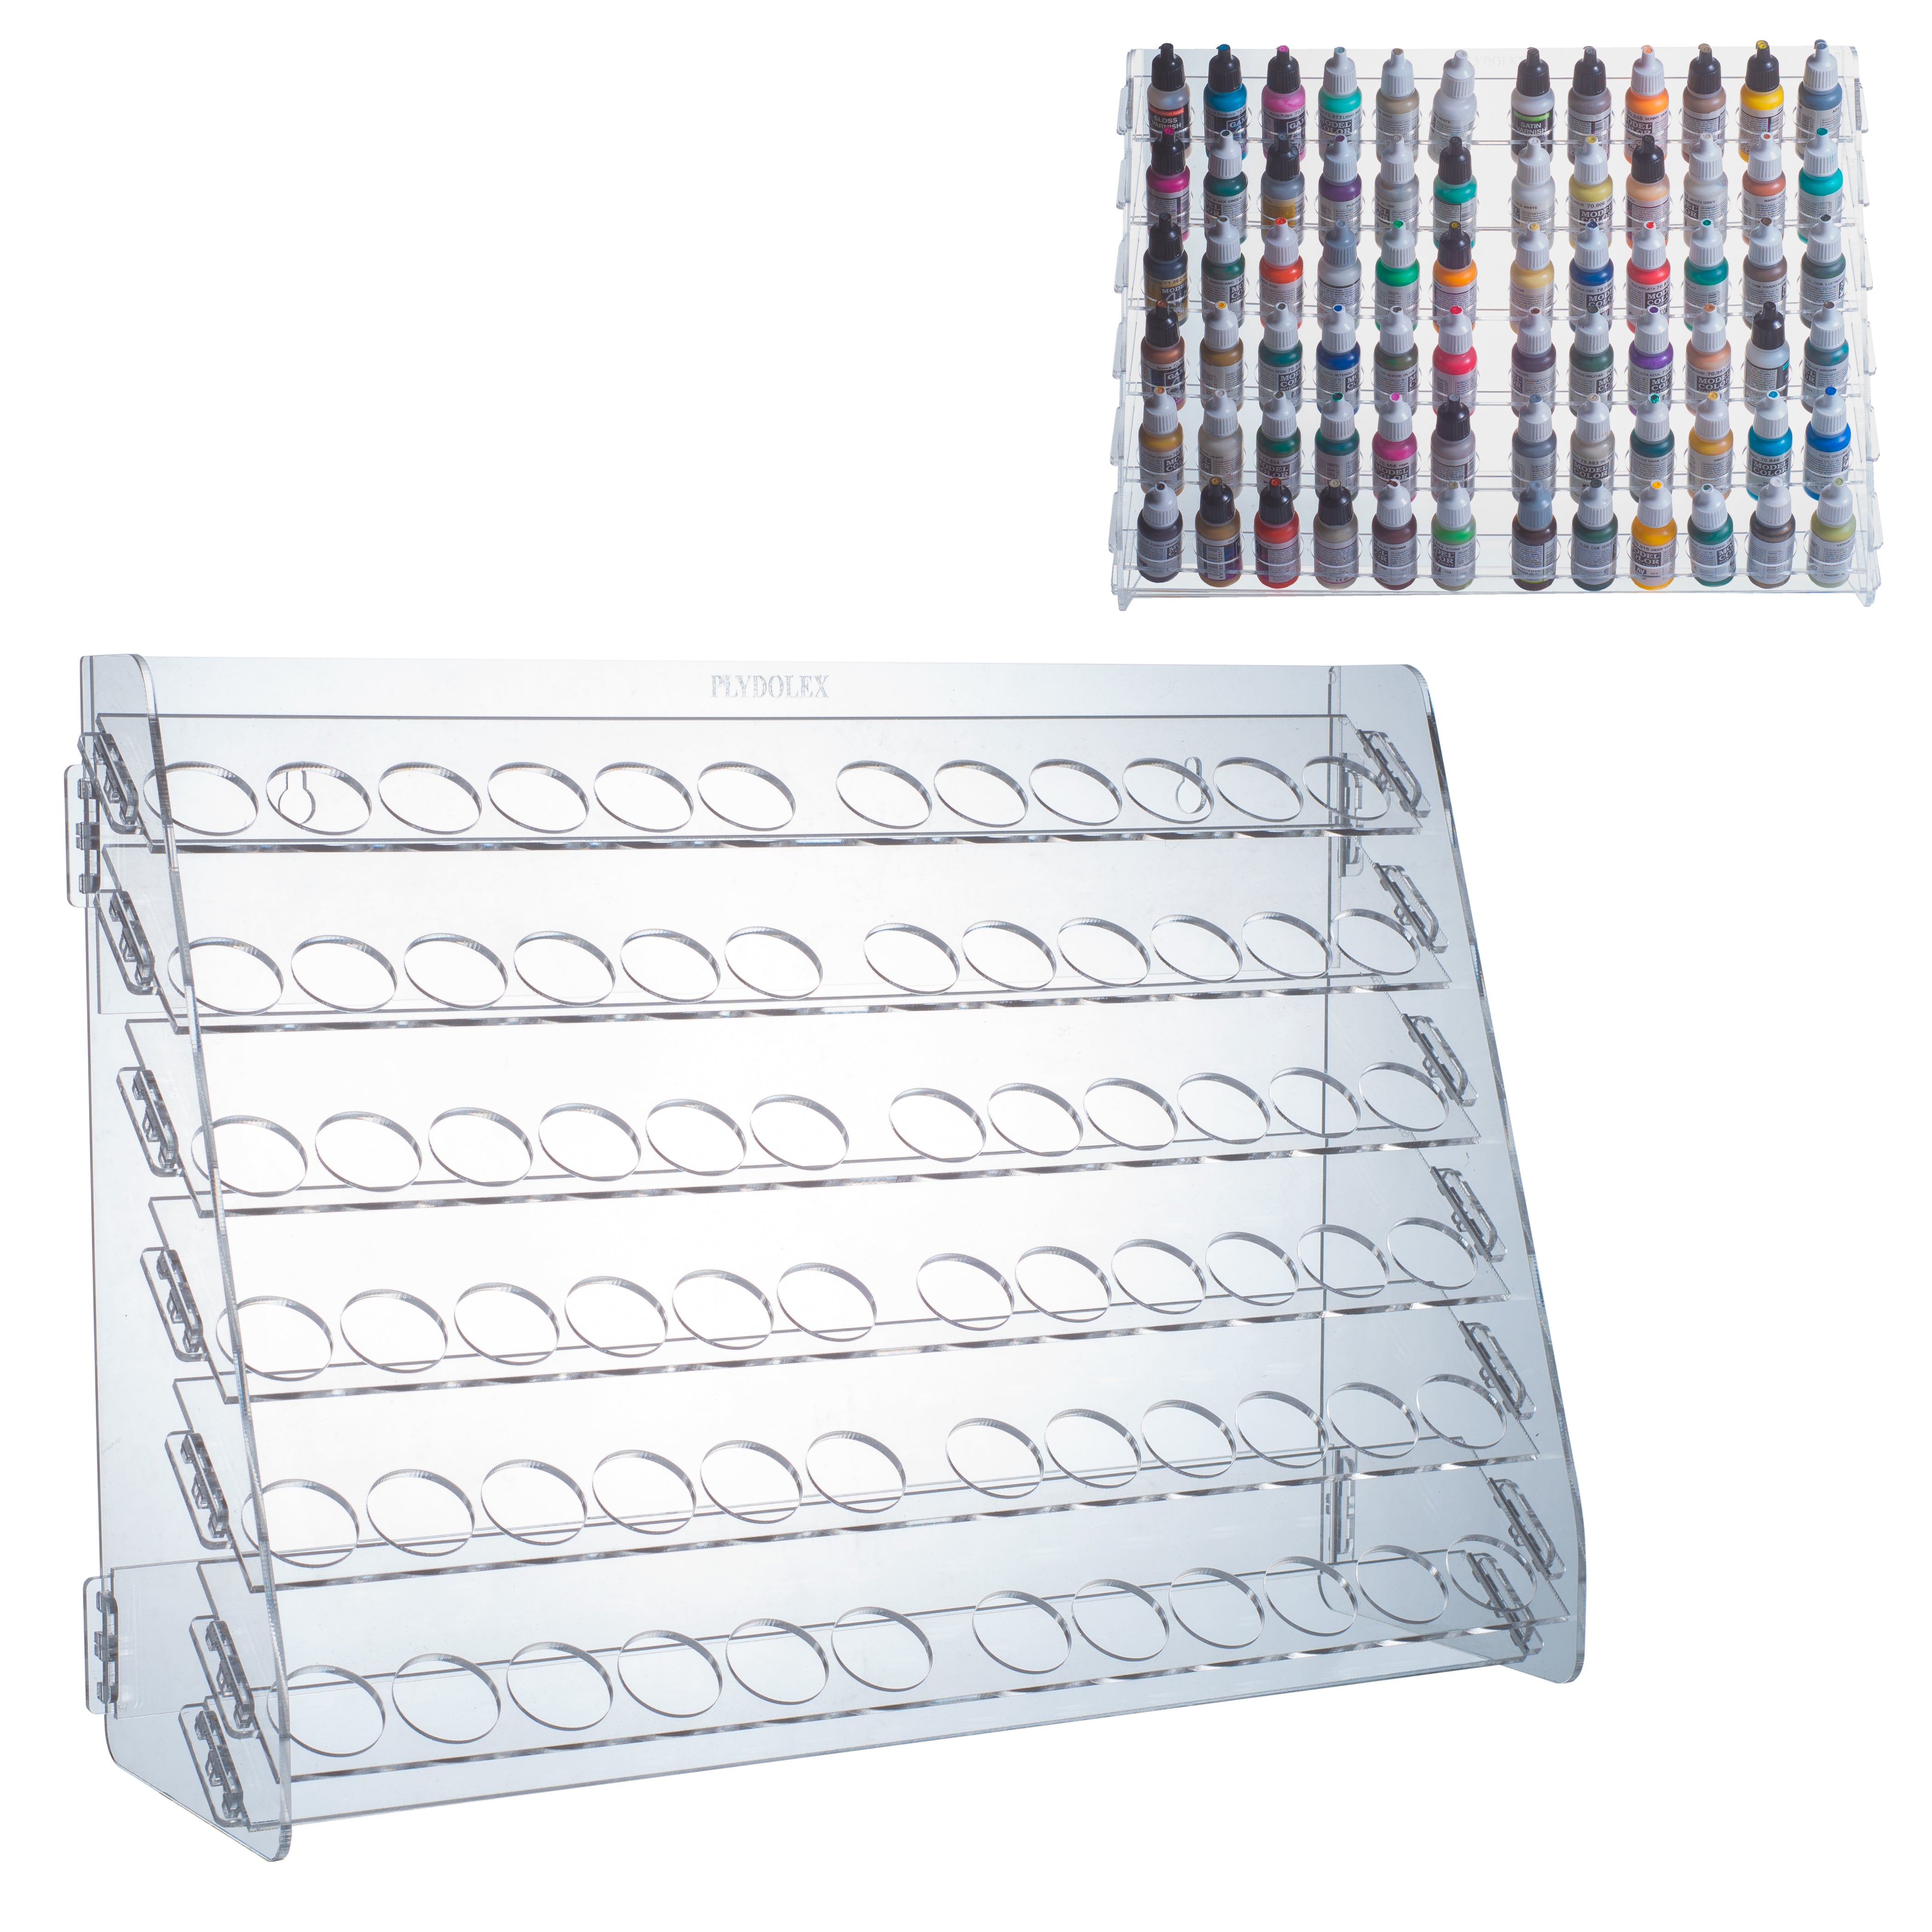 Plydolex Paint Organizer for 105 Paint Bottles and 14 Brushes